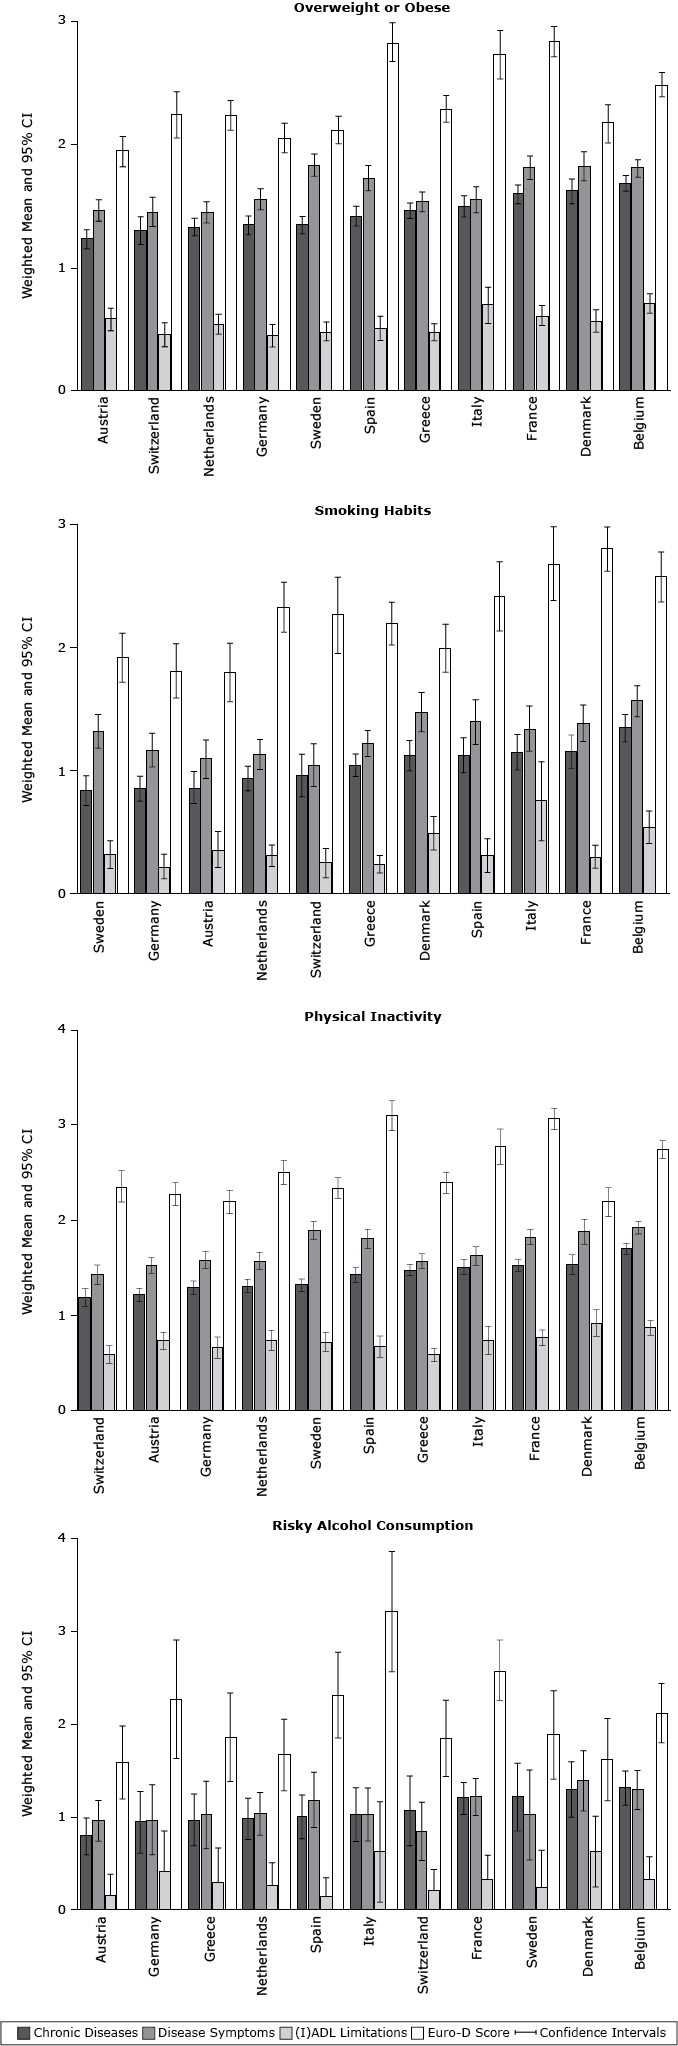 Weighted mean number of physical and mental health status components among participants with different behavioral risk factors in 11 European countries, Survey of Health, Ageing and Retirement in Europe, 2004–2005. Comparisons were examined using analysis of covariance (according to the complex sample design procedure), with sex, age (y), education (y), living with a partner or spouse, self-rated health, income, and retirement status as covariates. Abbreviations: CI, confidence interval; (I)ADL, activities and instrumental activities of daily living; Euro-D score, European Depression Scale Score. 